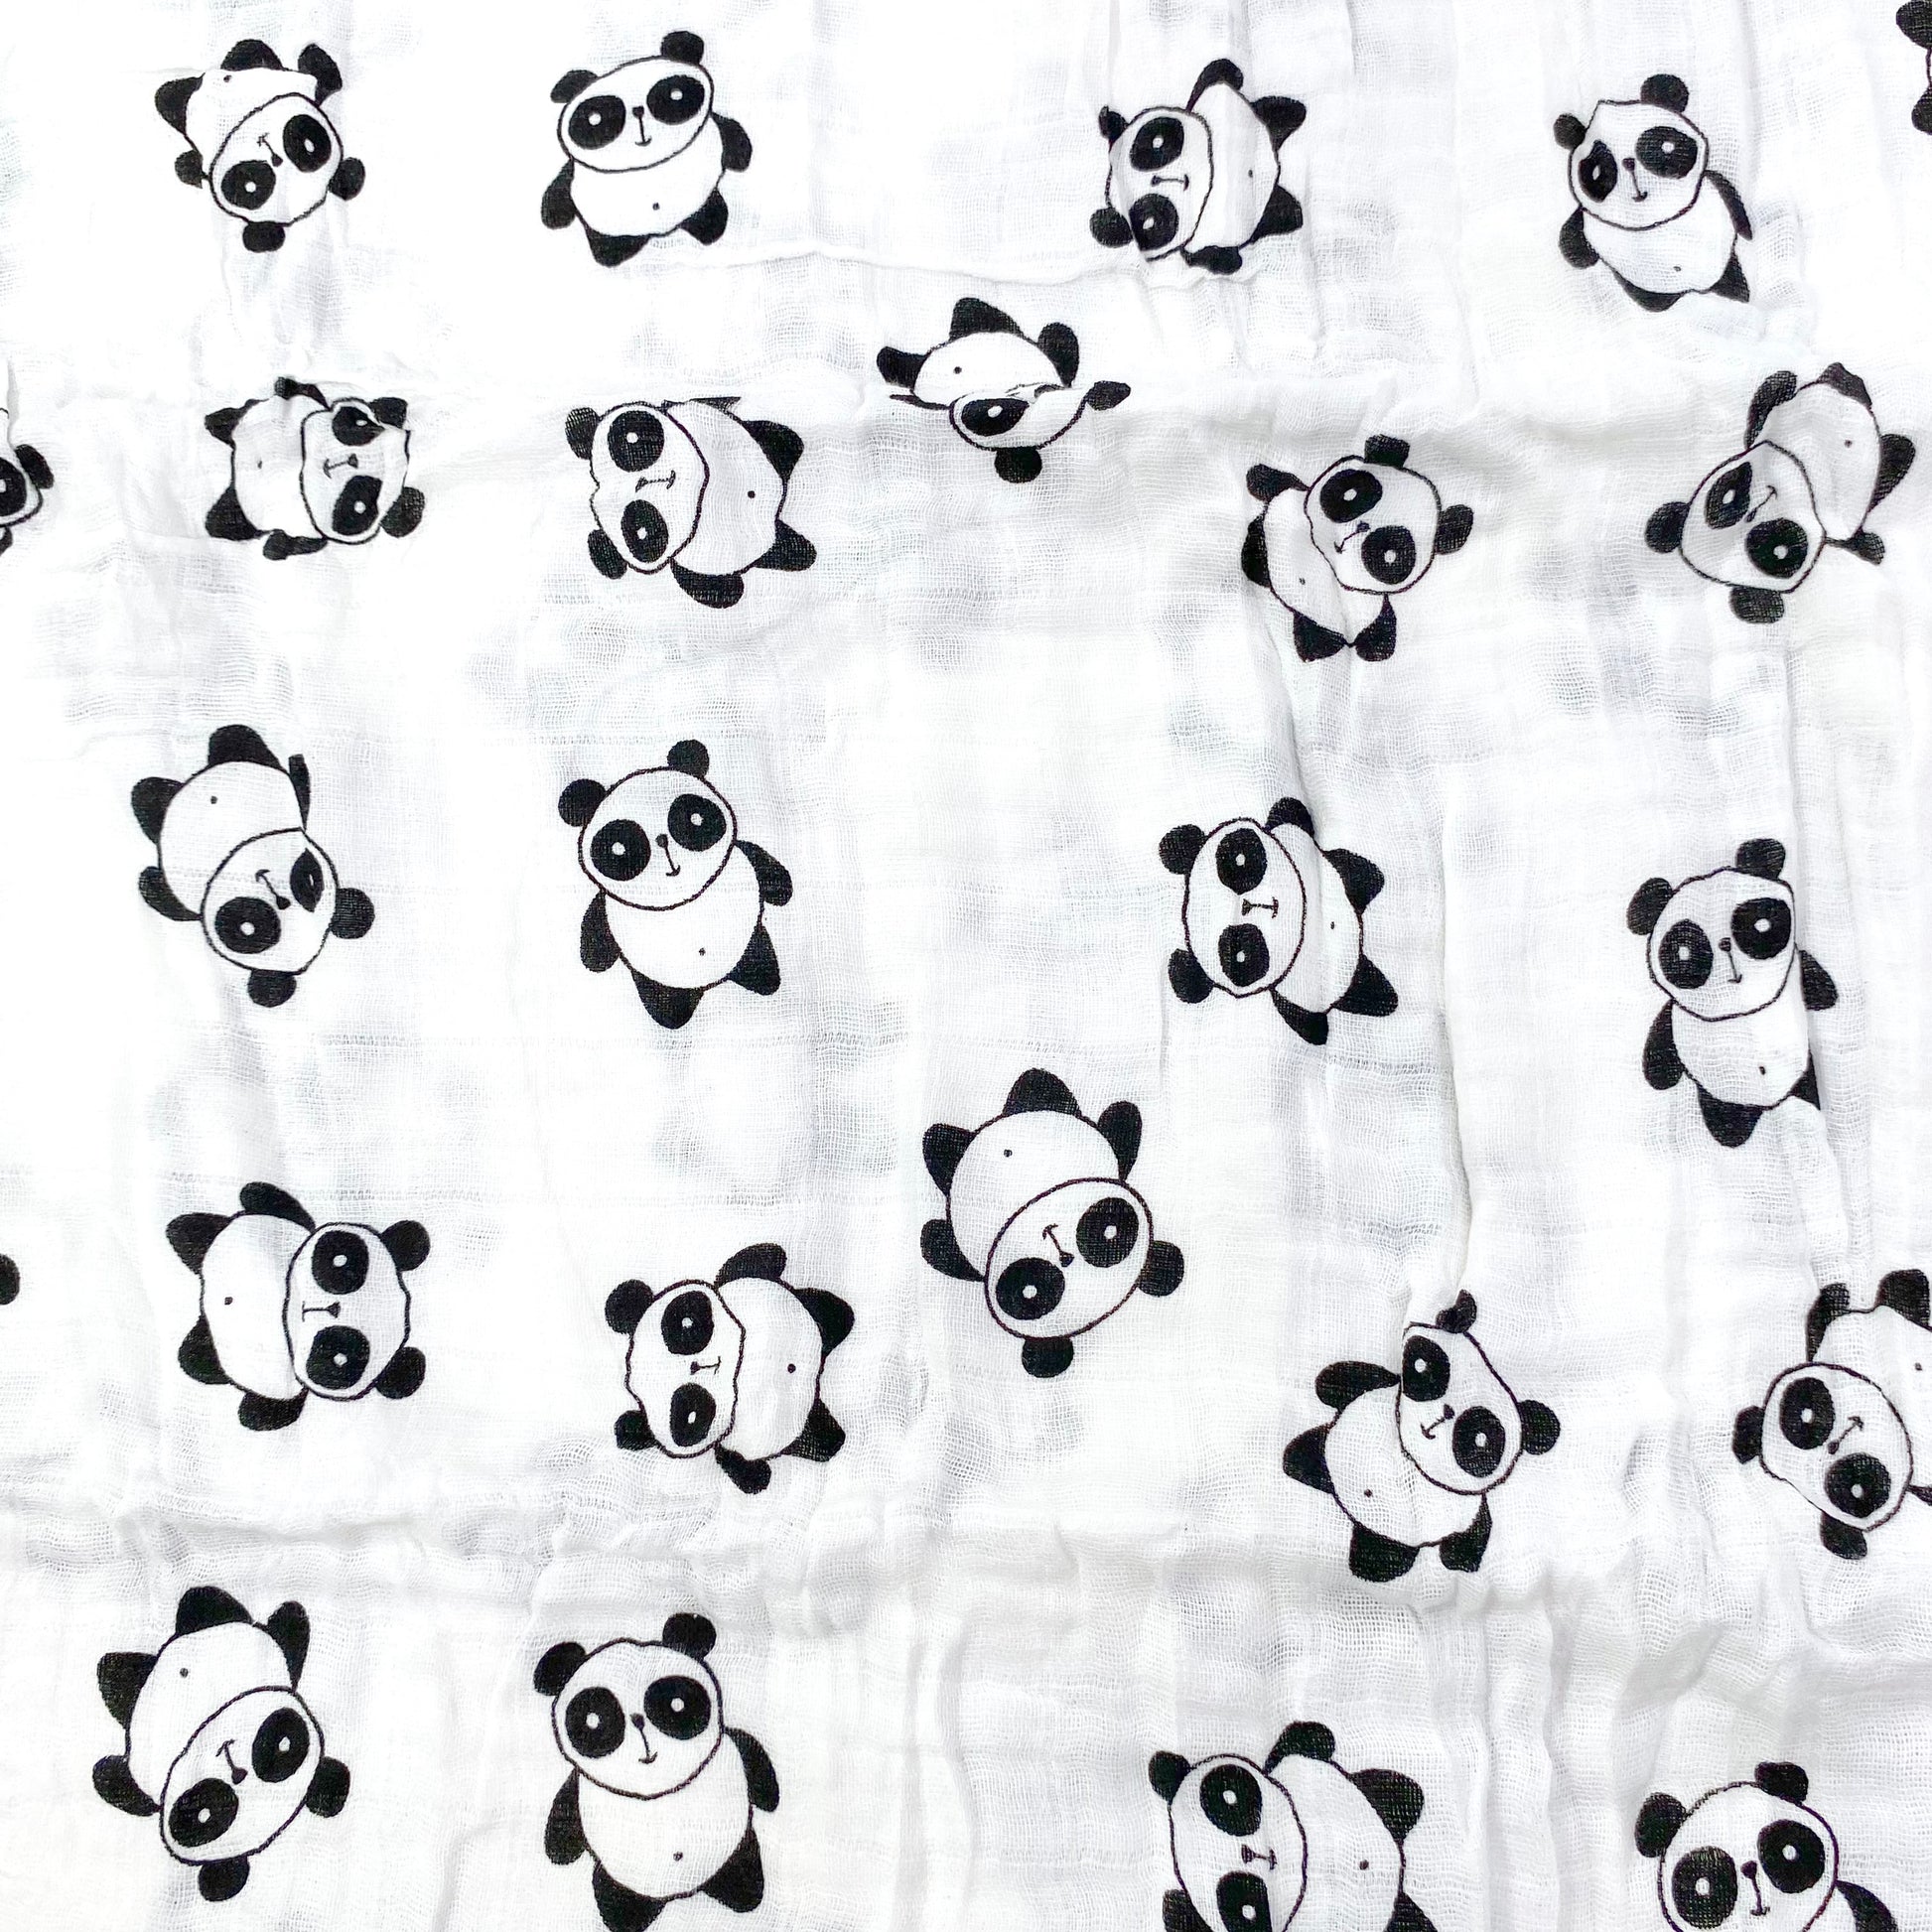 A close up view of the panda pattern of a muslin baby blanket.